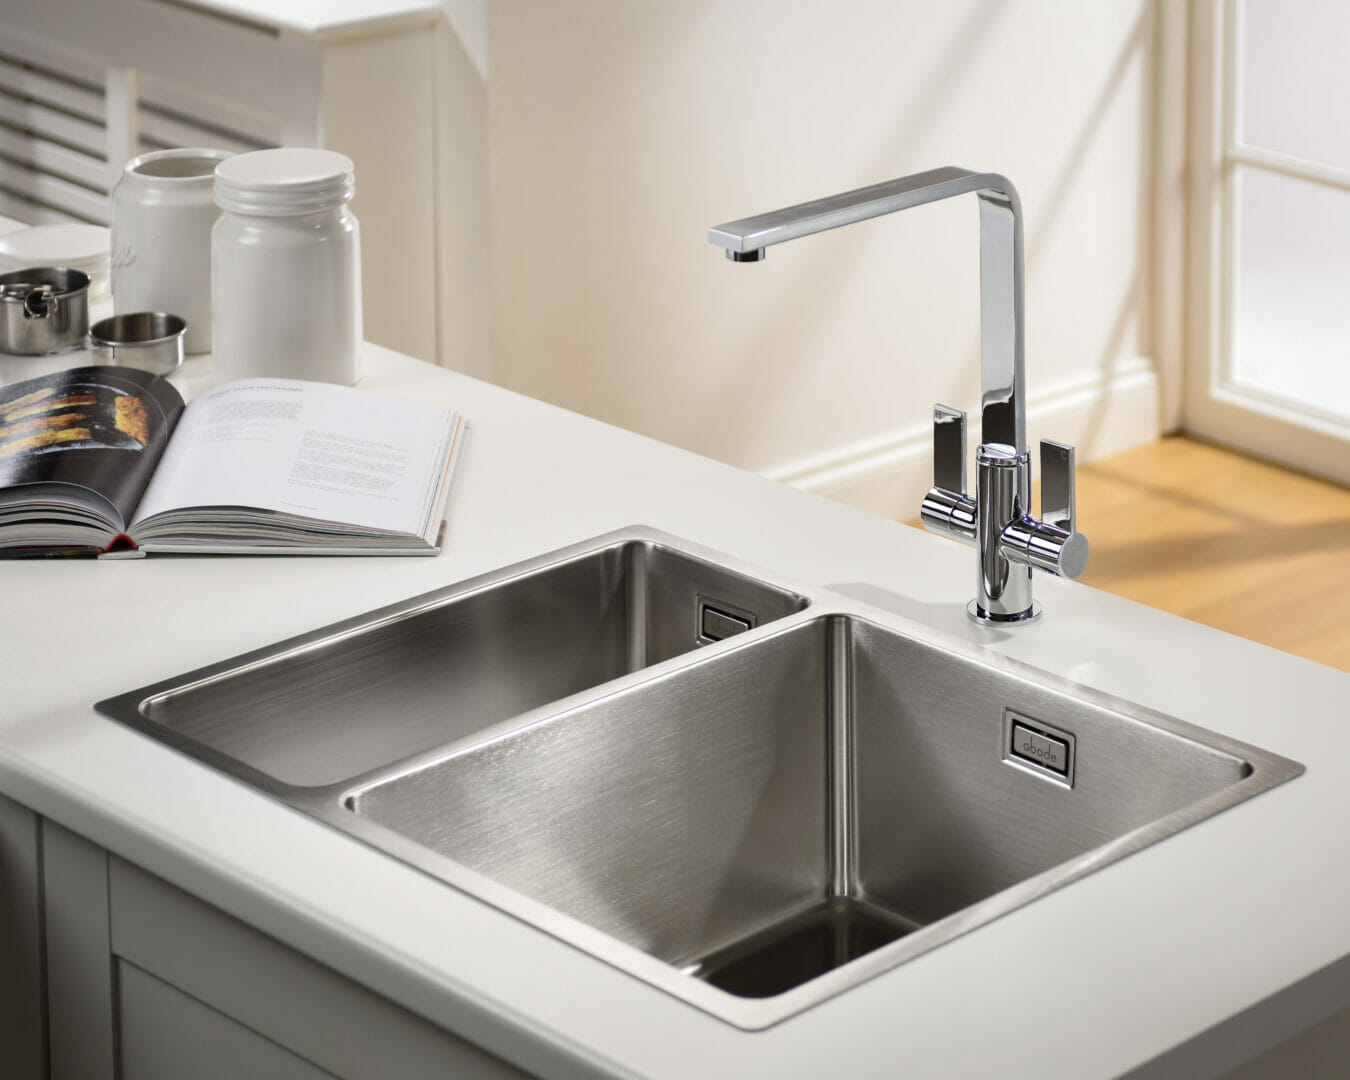 Large format sinks continue to uplevel the kitchen wash zone